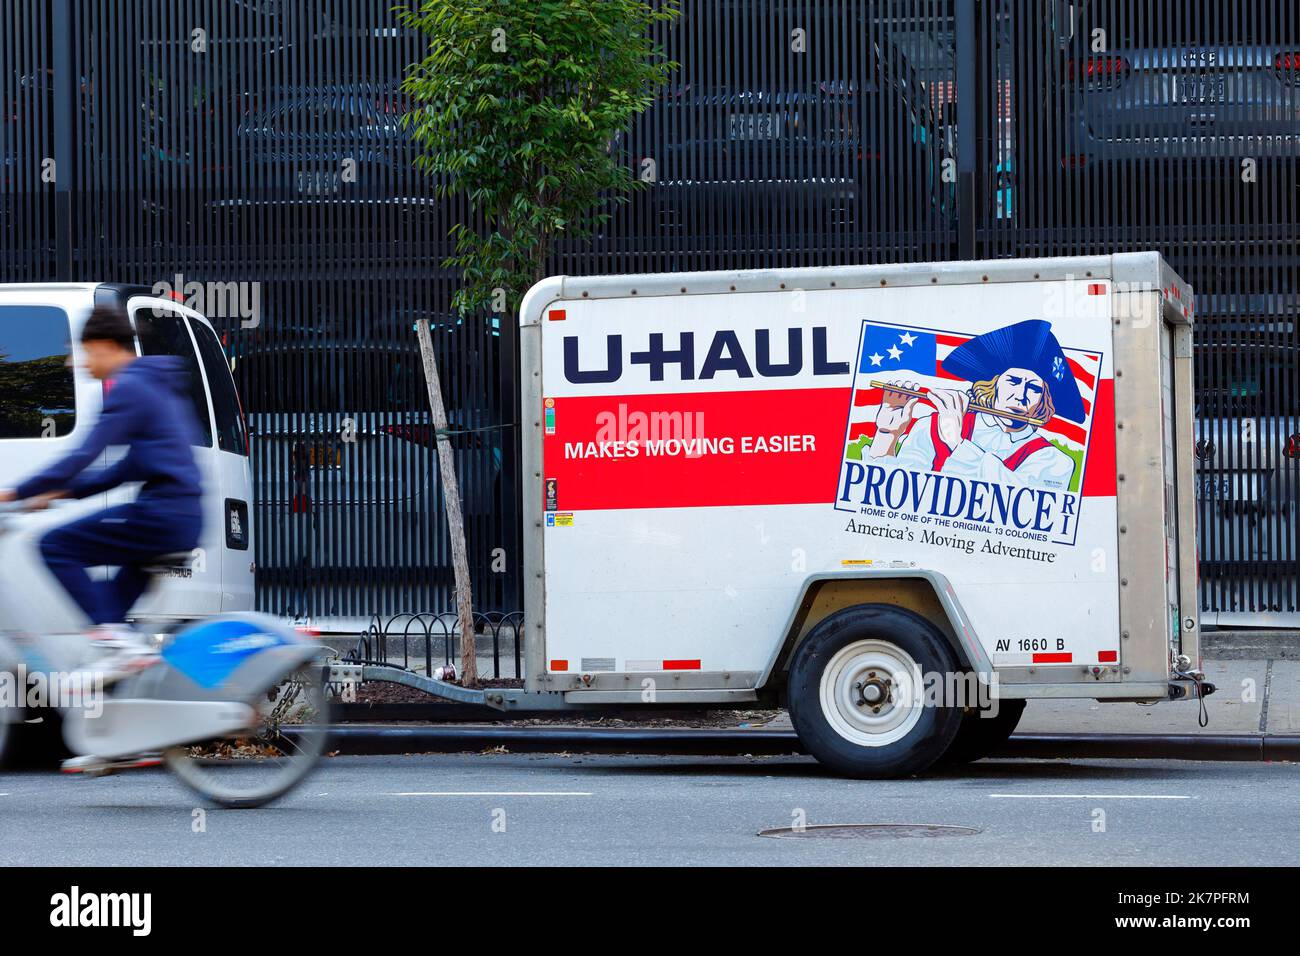 A U-Haul rental 5x8 Cargo Trailer with a Providence, Rhode Island SuperGraphics travel game image on the side. Stock Photo